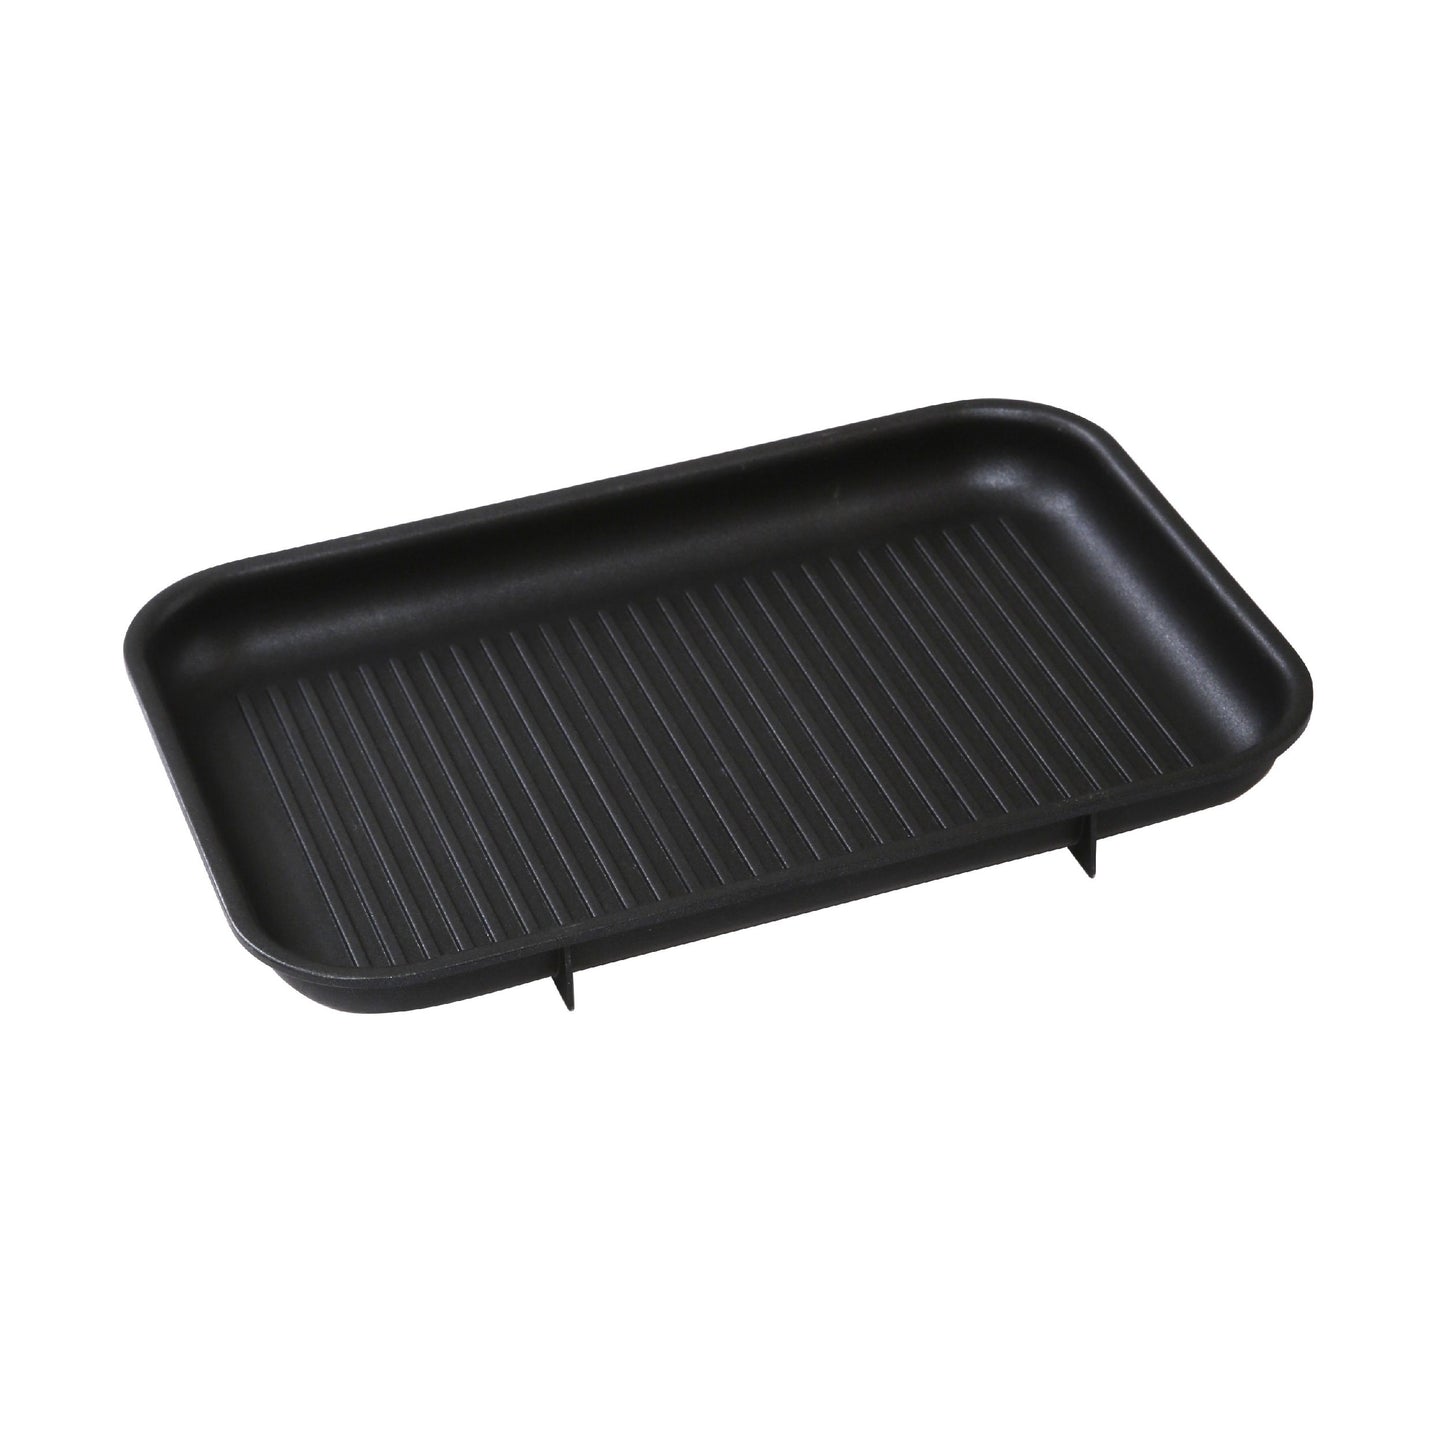 COMPACT Grill Plate